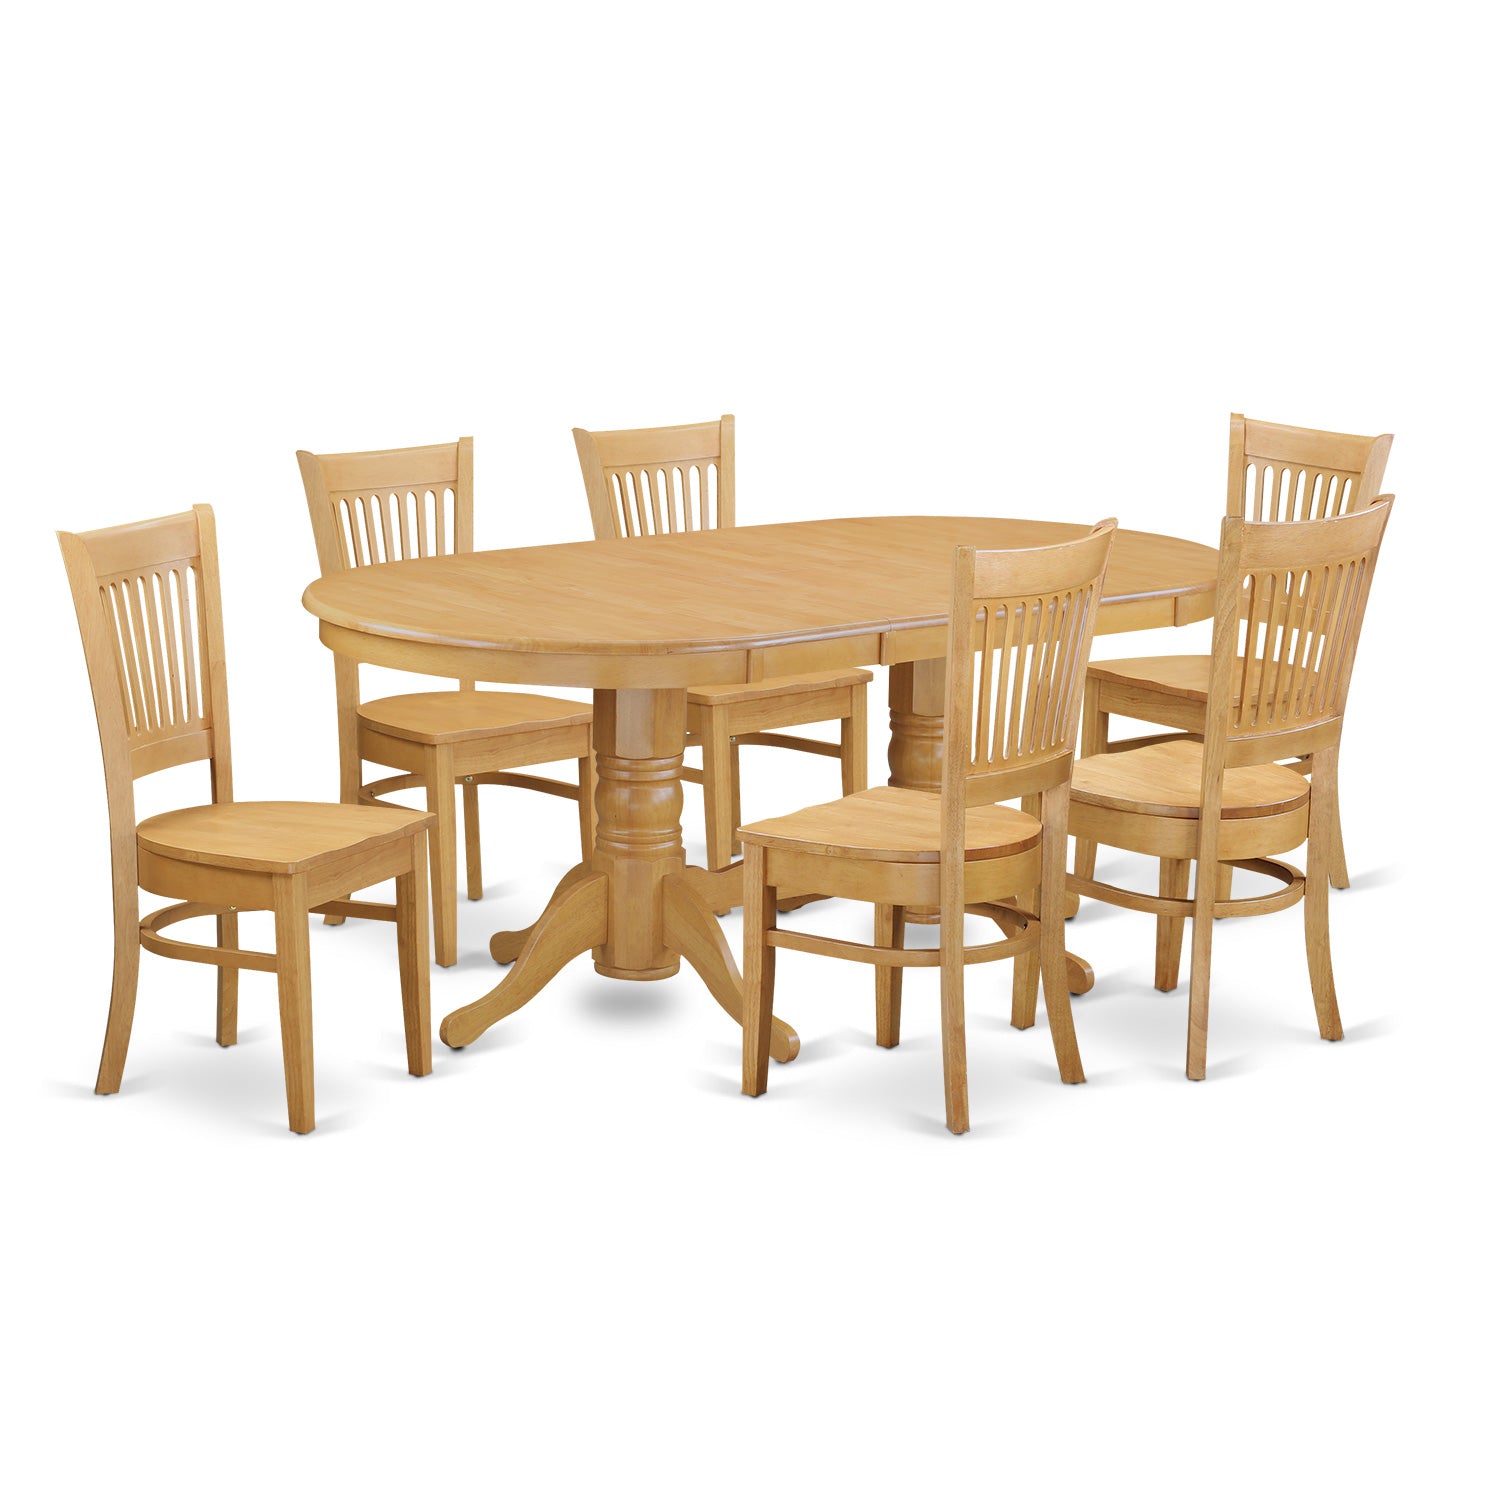 Vancouver 7 Pc Oval Dining room Table with Leaf and 6 Chairs In Oak